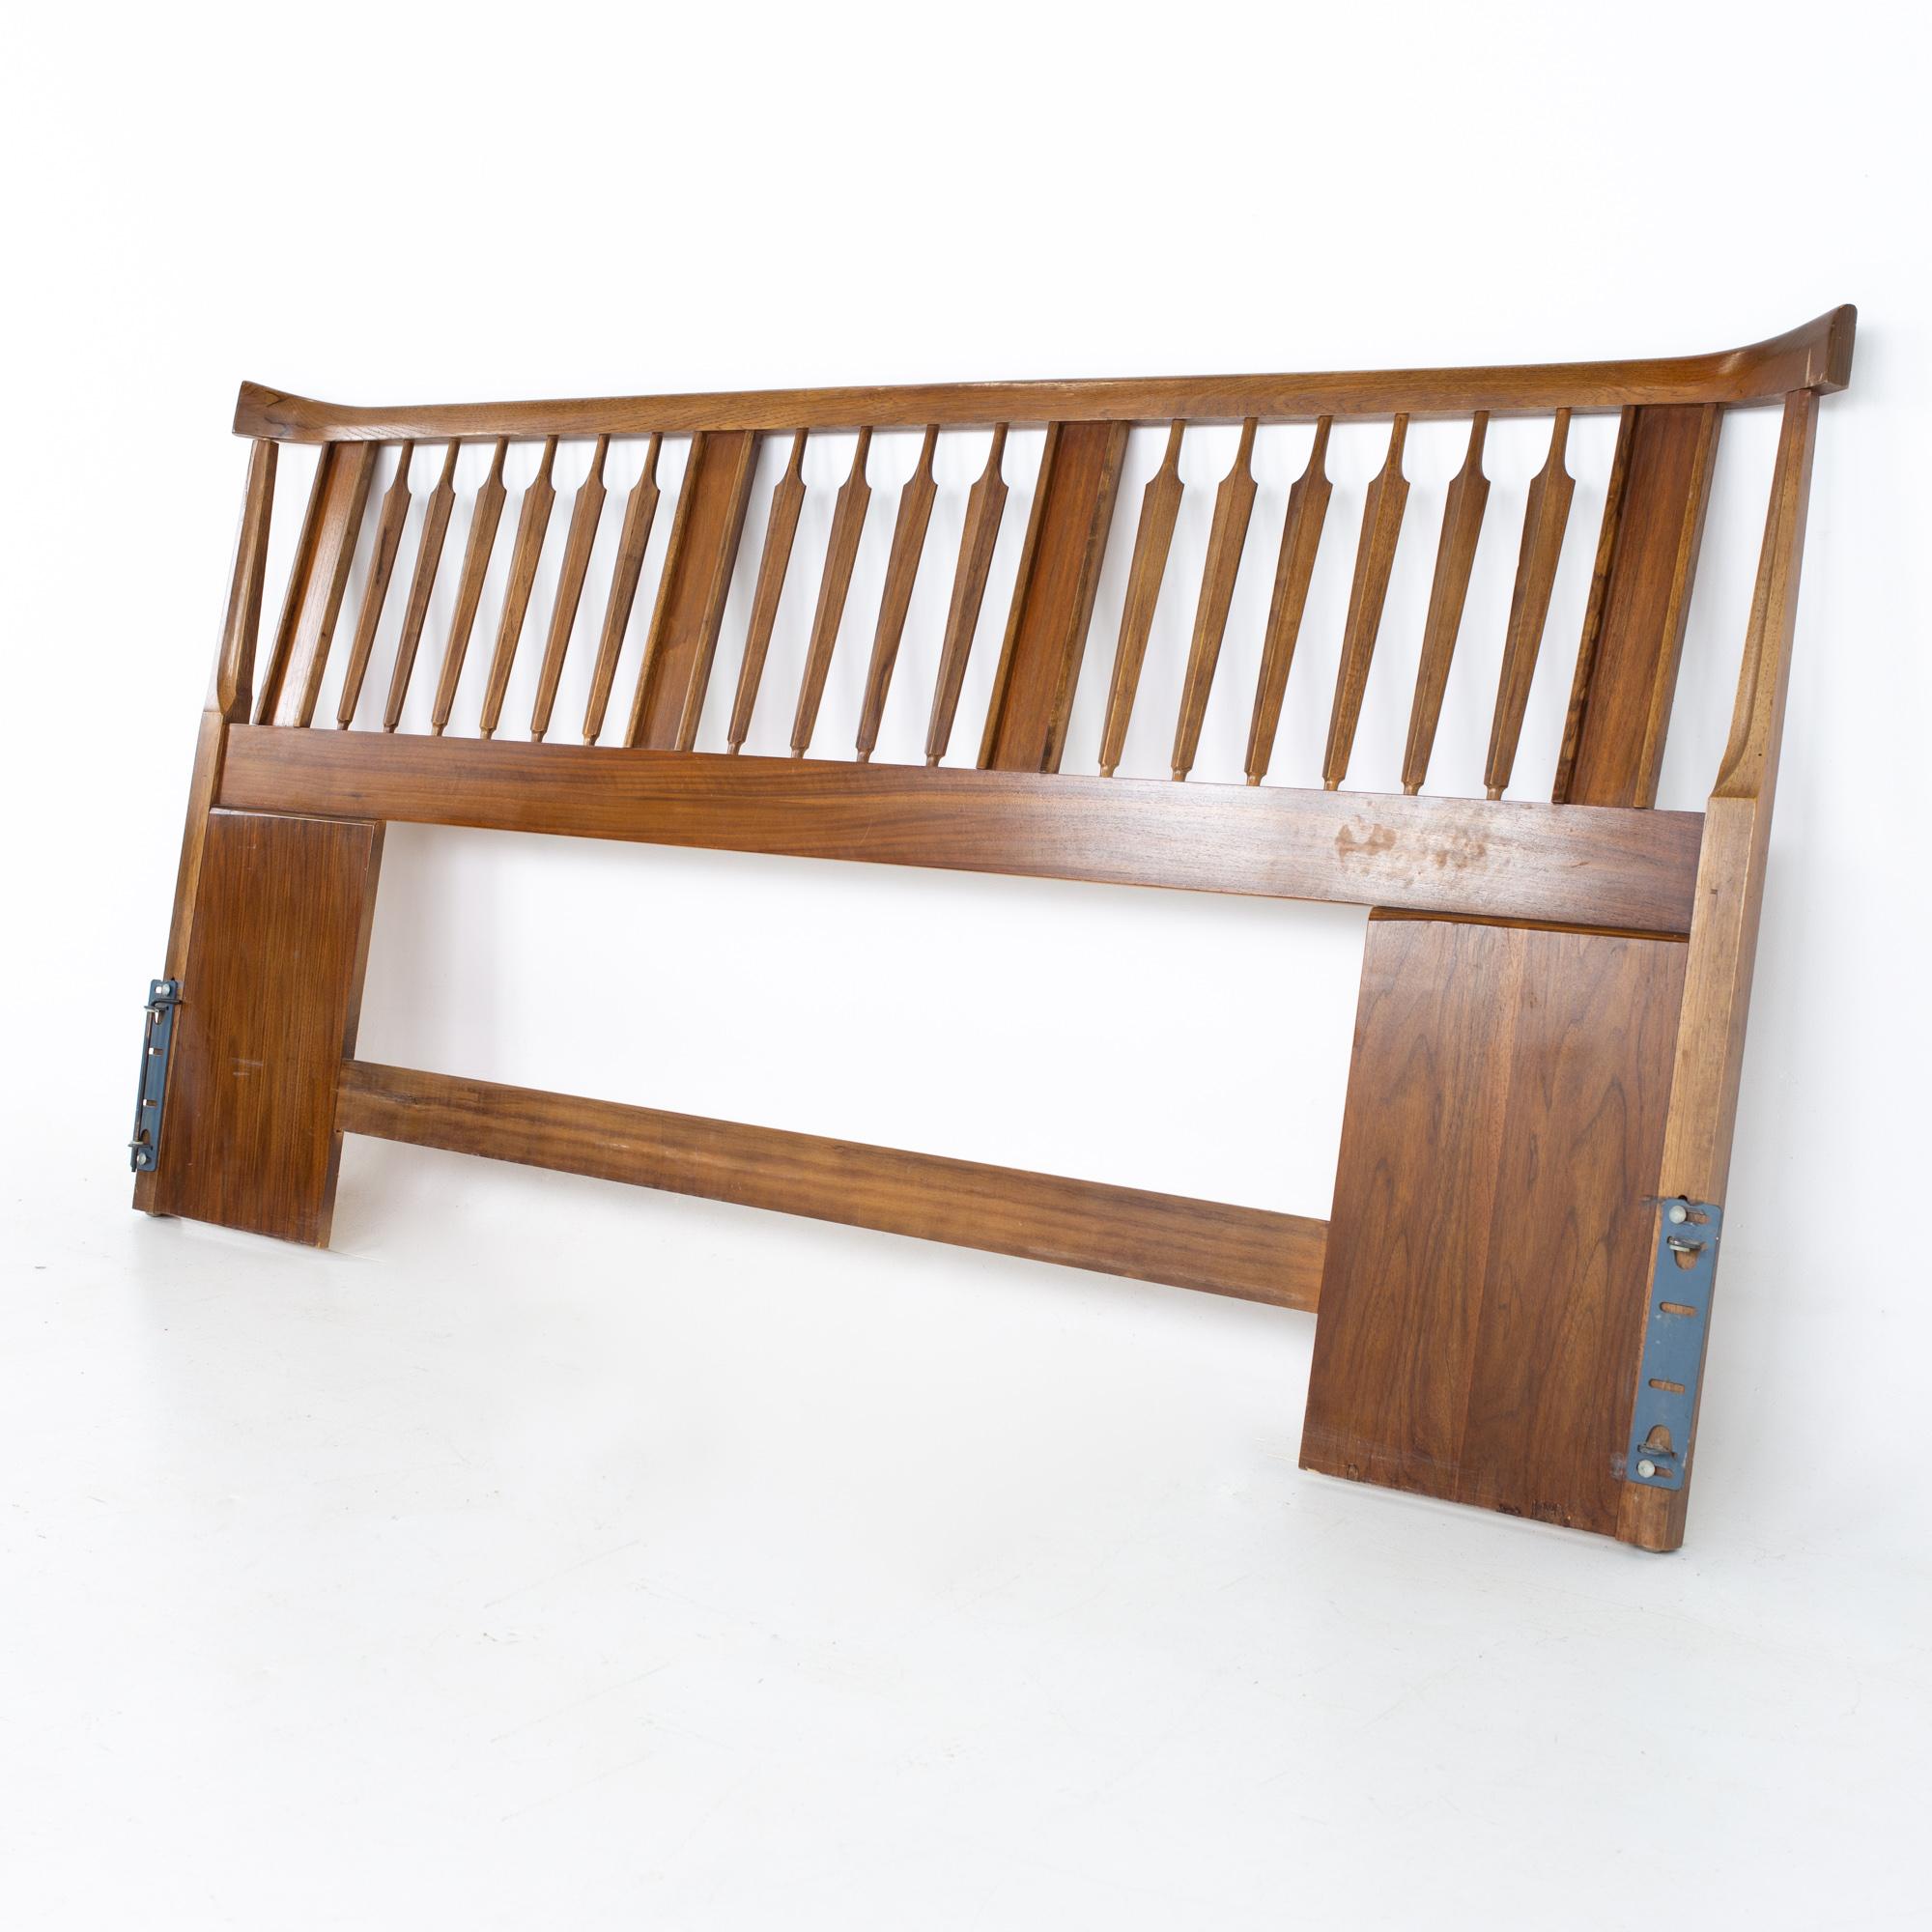 Thomasville Brutalist mid century walnut king headboard.
Headboard measures: 81.75 wide x 2 deep x 41.5 inches high

All pieces of furniture can be had in what we call restored vintage condition. That means the piece is restored upon purchase so